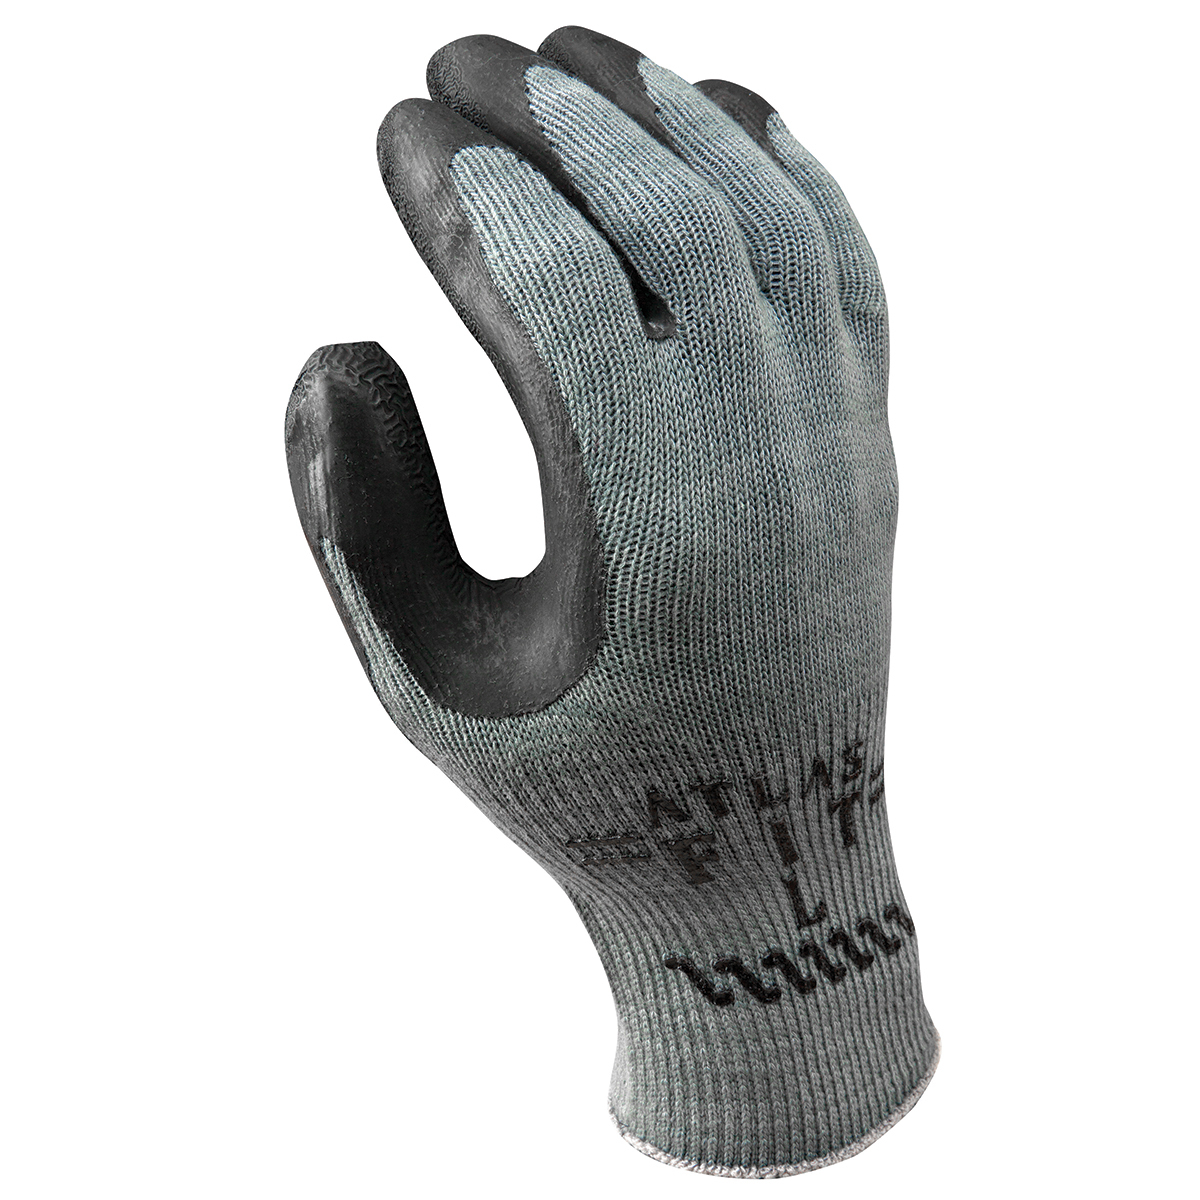 SHOWA® Size 8 ATLAS® 10 Gauge Natural Rubber Palm Coated Work Gloves With Cotton And Polyester Liner And Knit Wrist